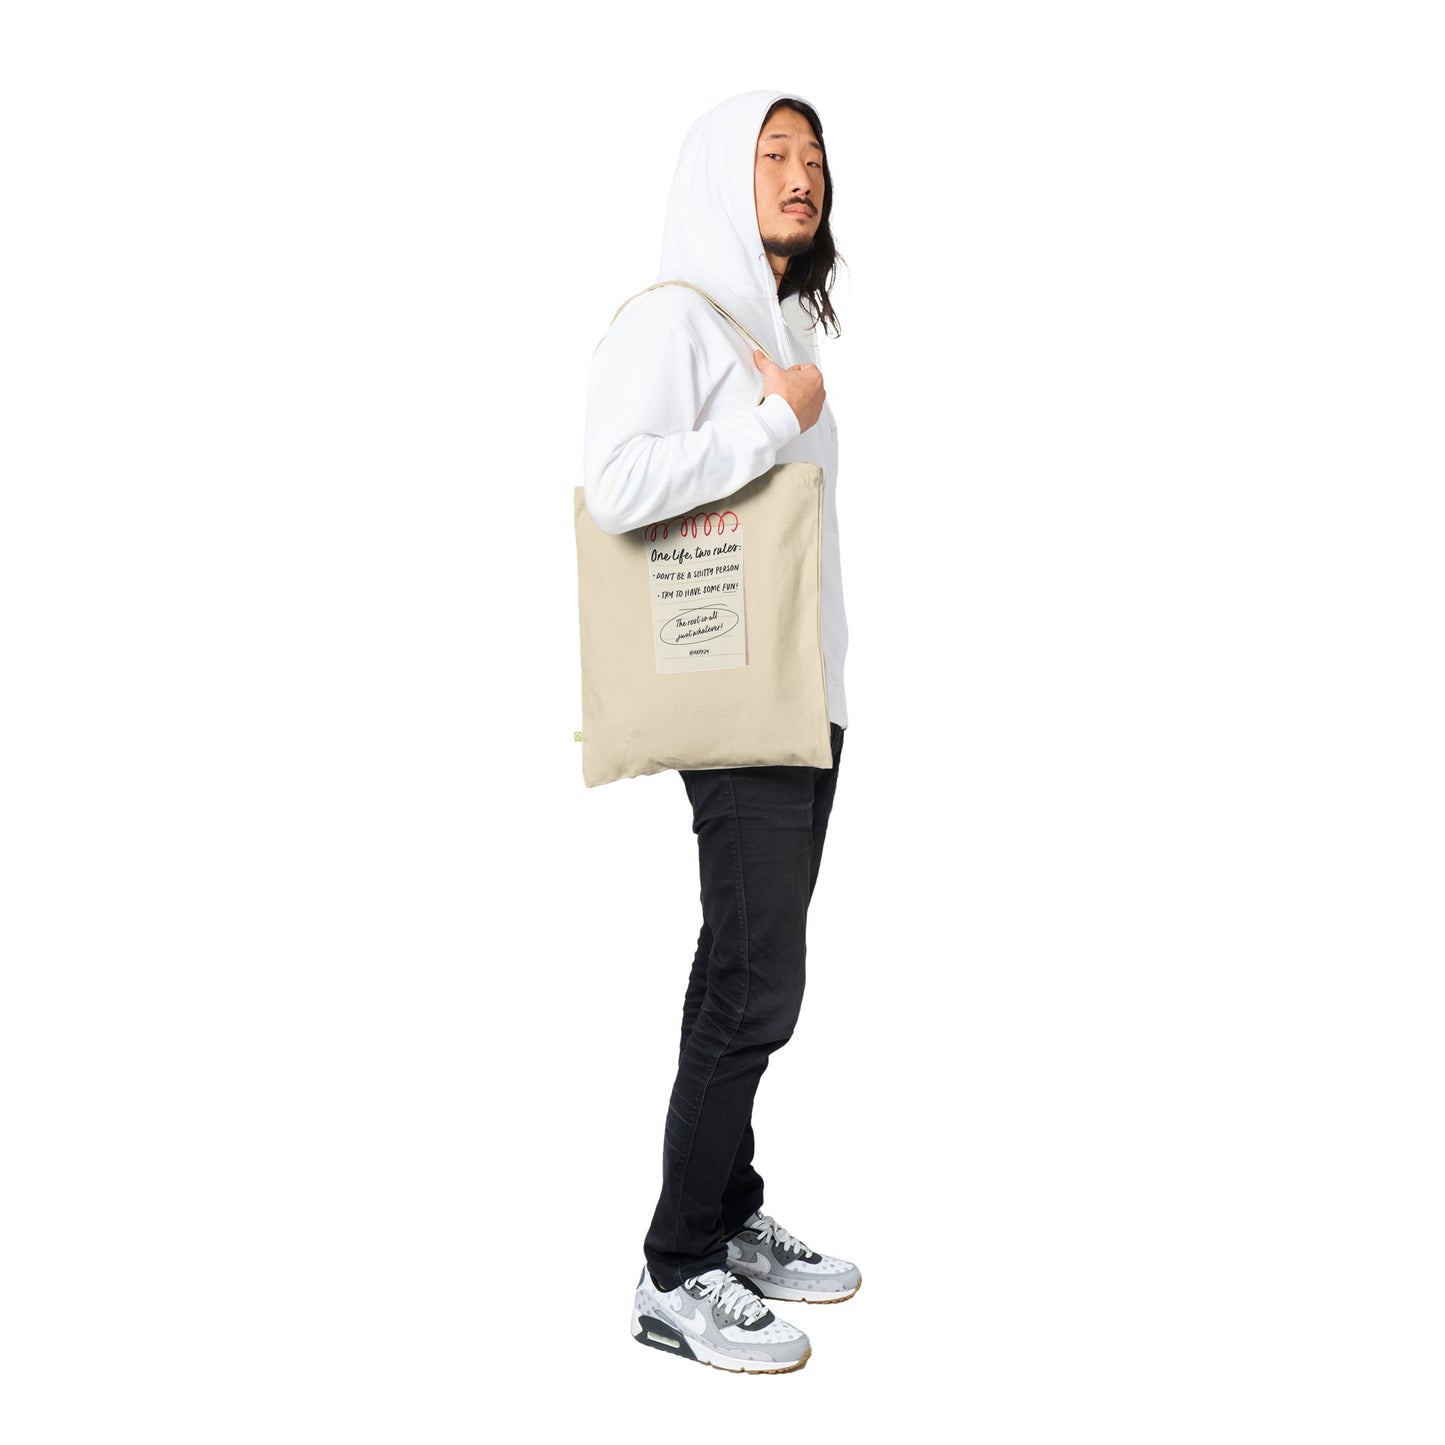 Premium Tote Bag - One Life, Two Rules